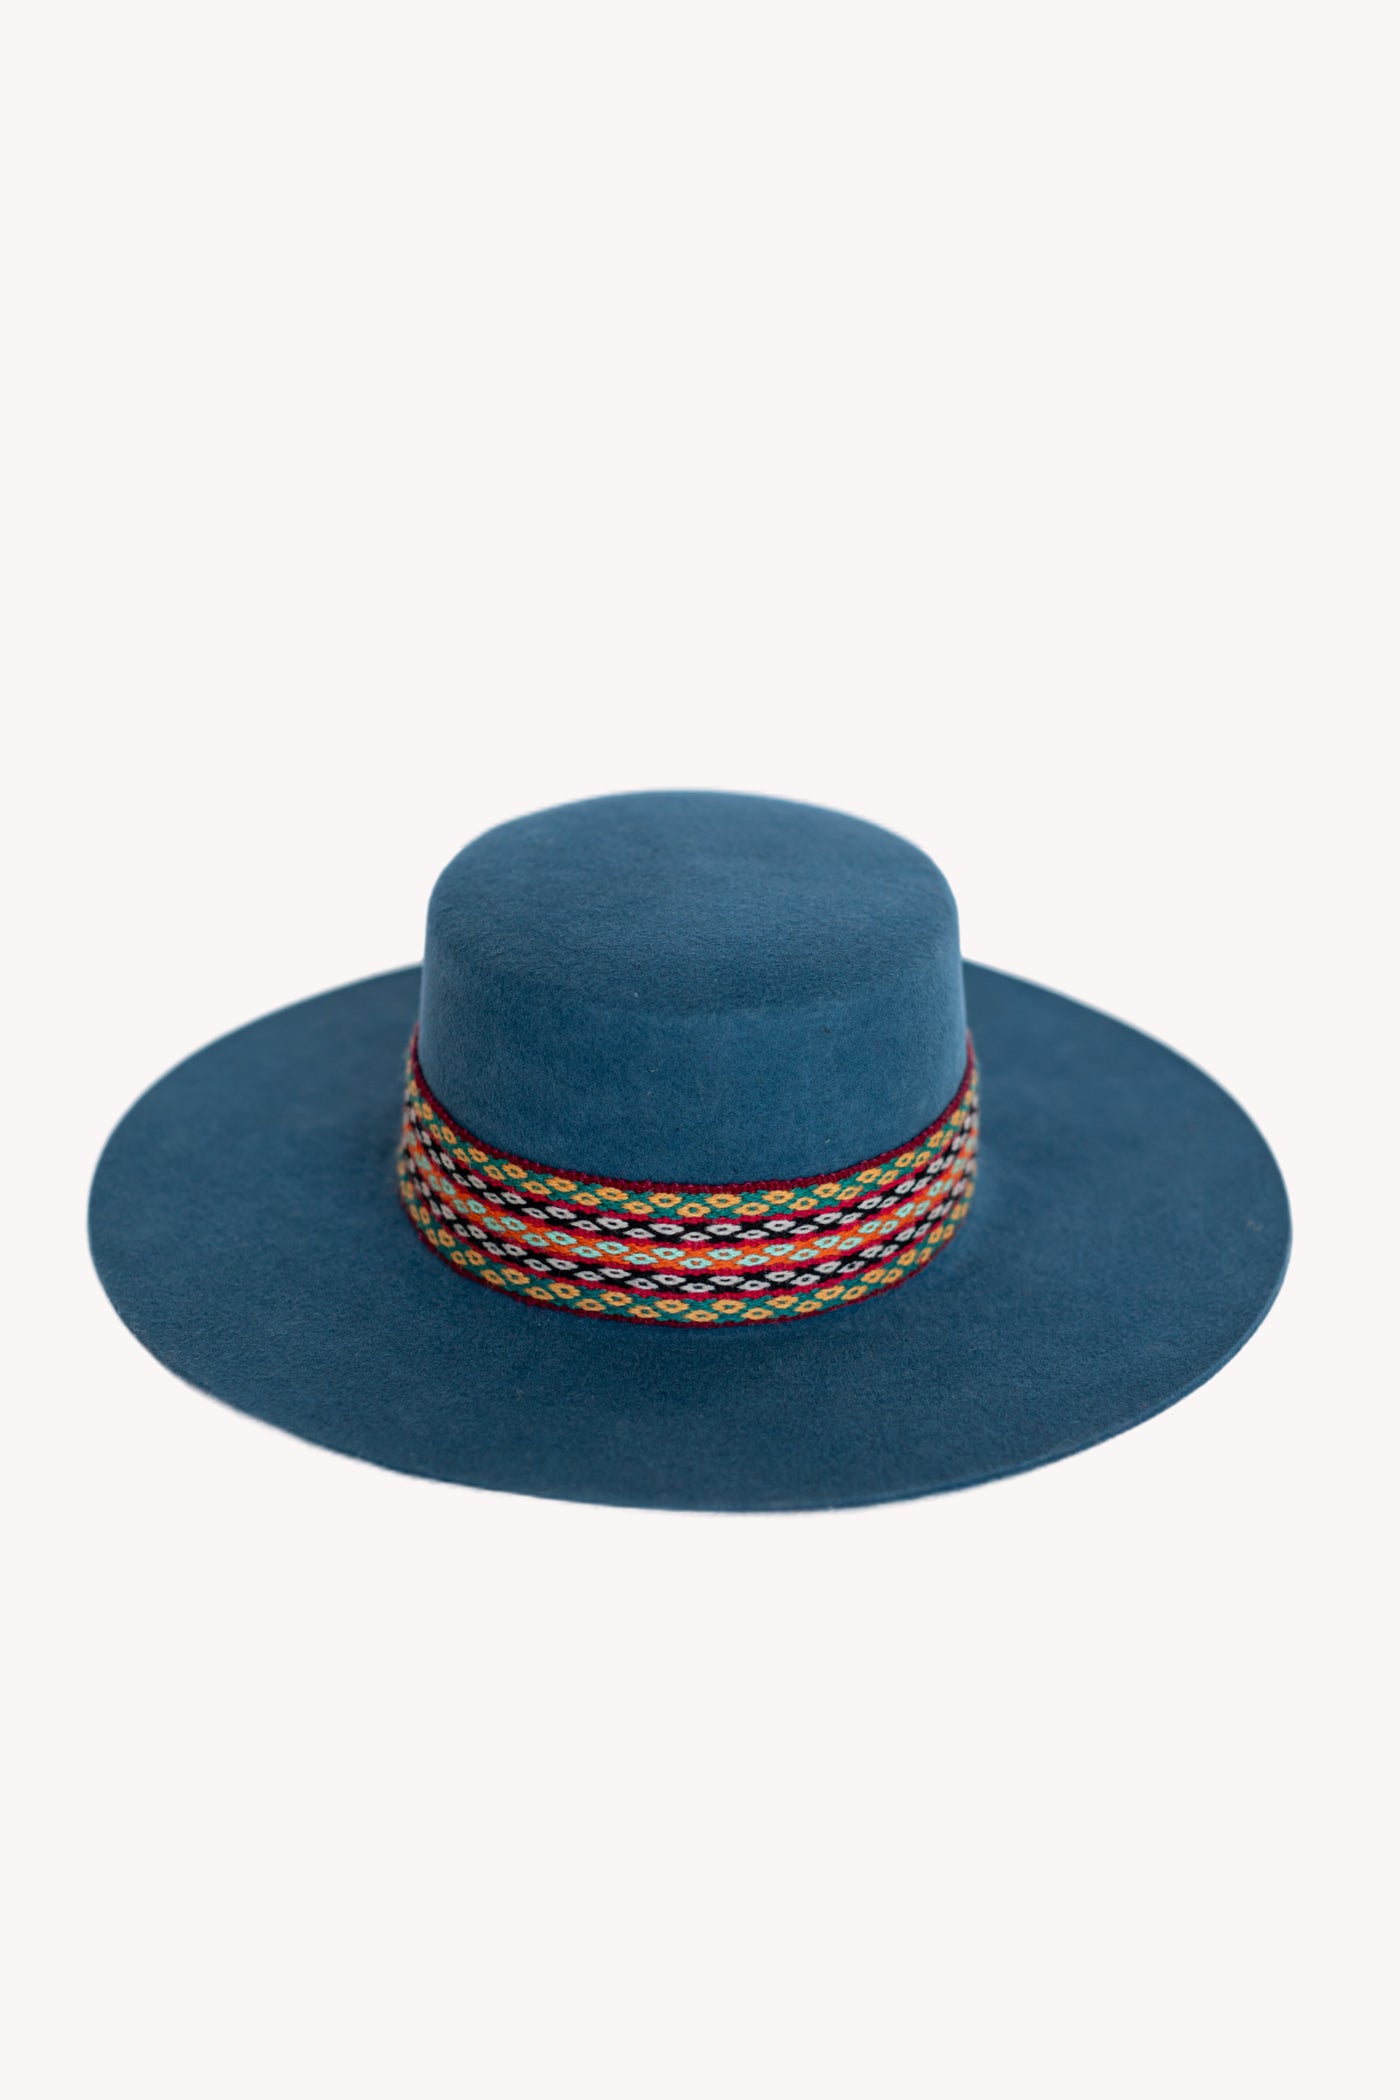 Denim Spanish Hat with Happiness Intention Band Removable Intention Hat Textile Band